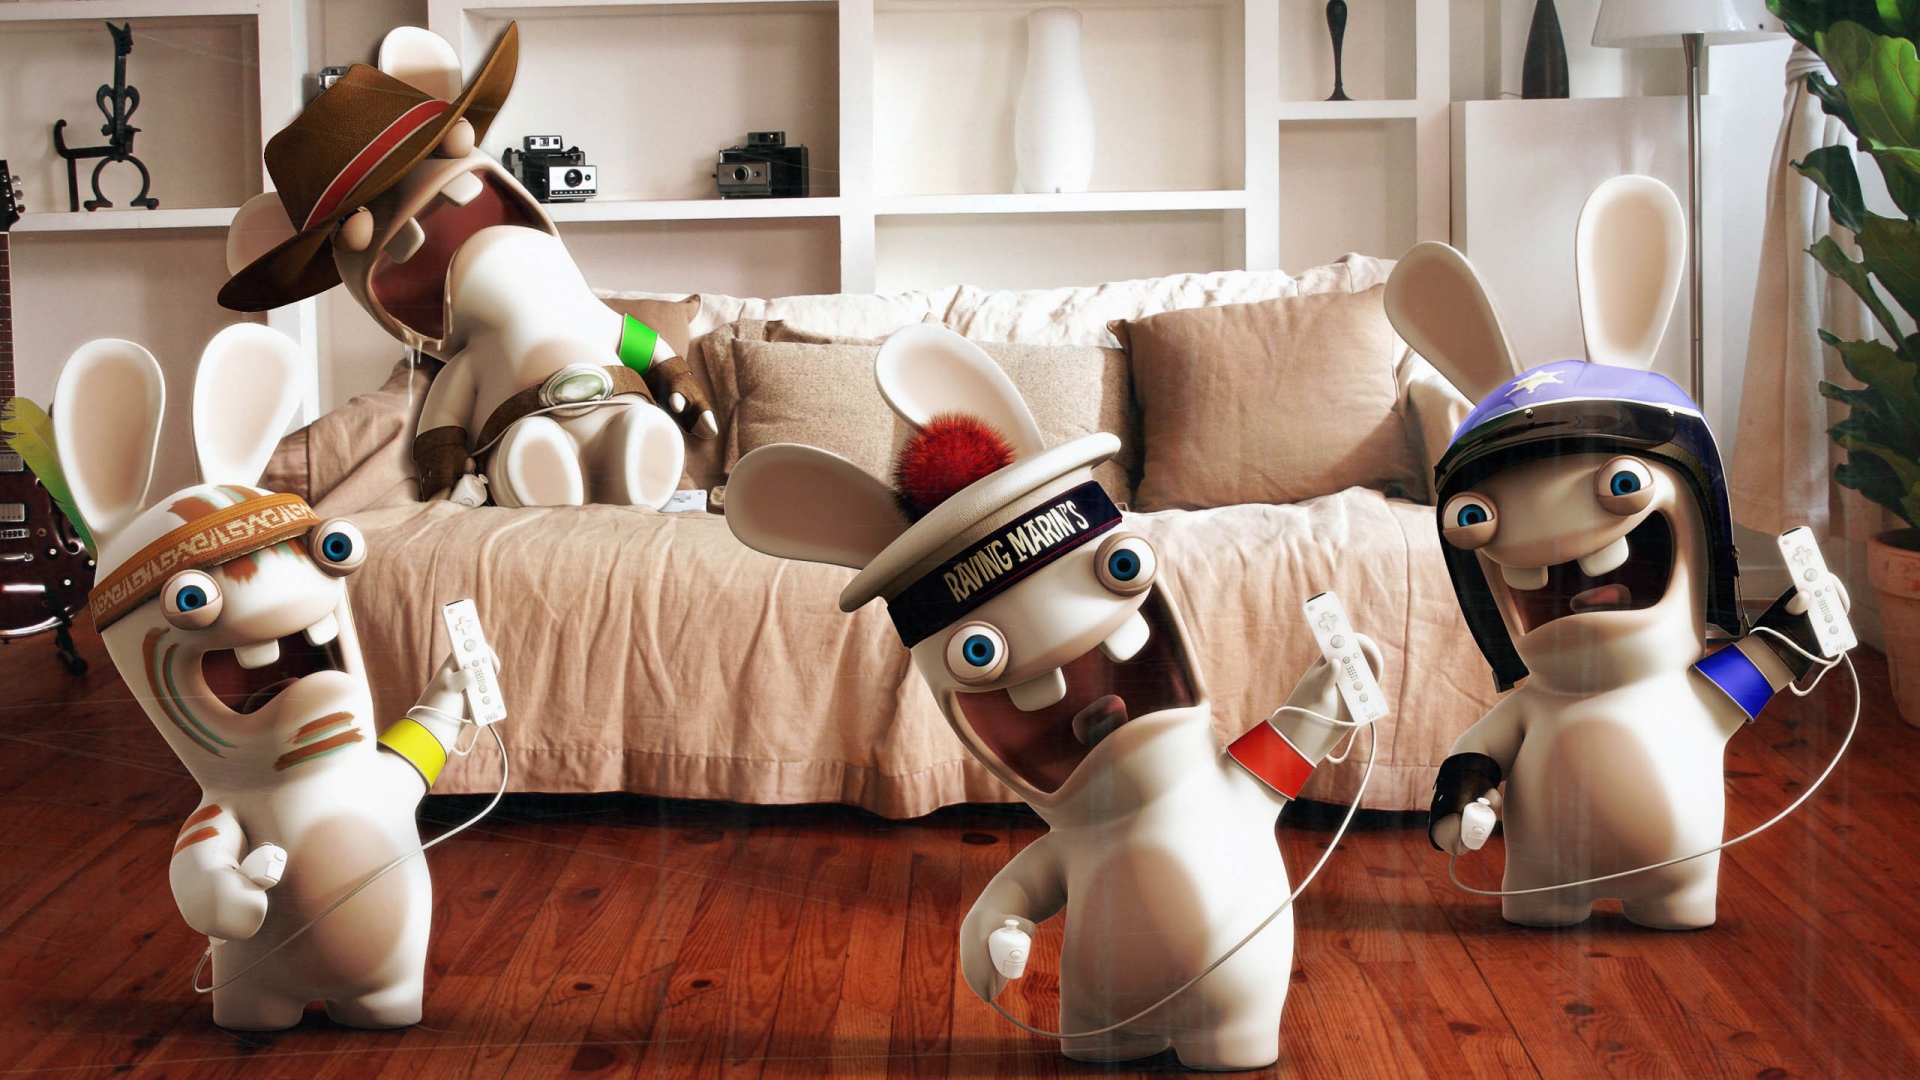 Rayman Raving Rabbids Playing Wii for 1920 x 1080 HDTV 1080p resolution